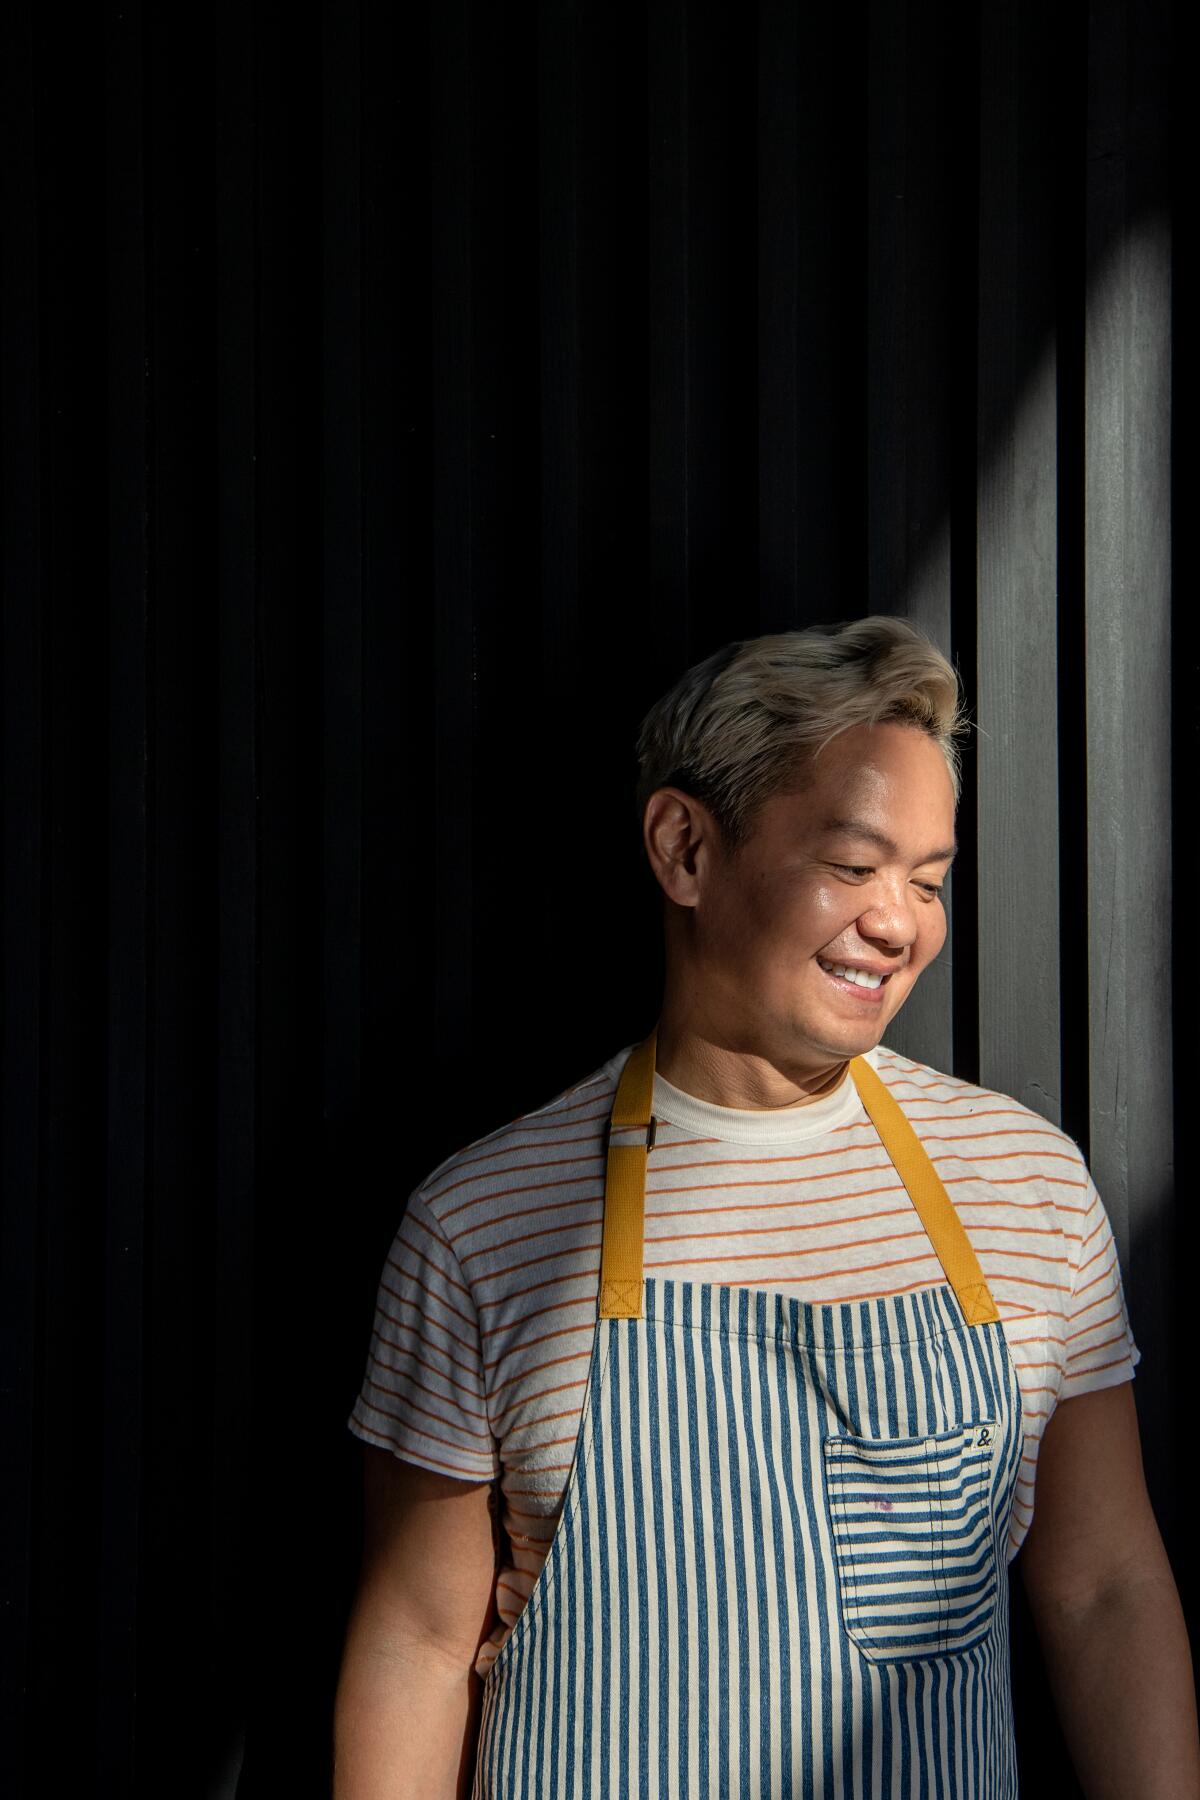 A smiling man in an apron with a deep angled shadow.